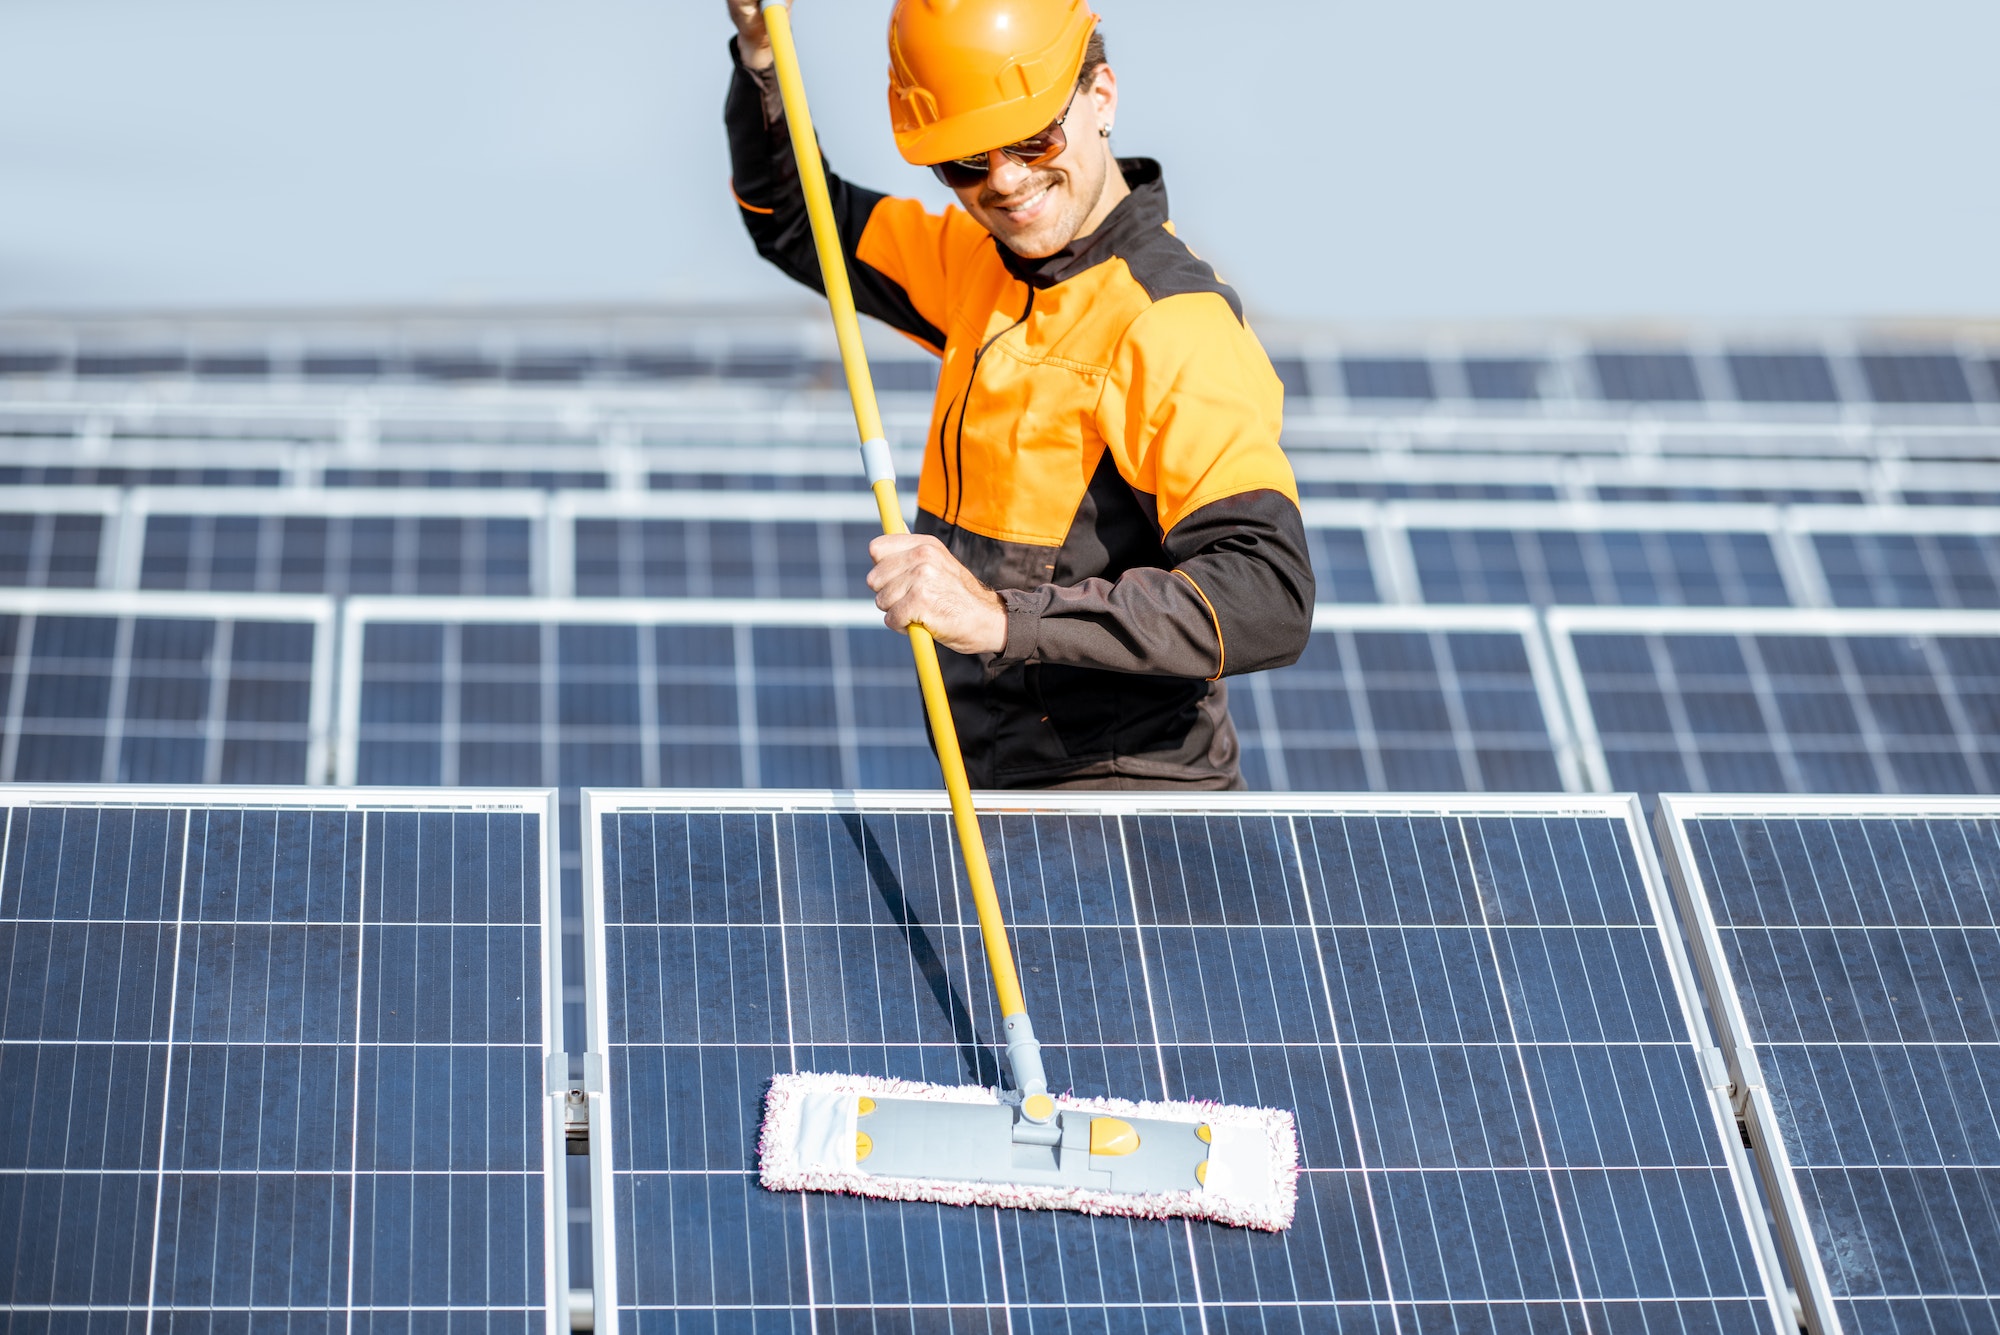 Workman cleaning solar panels